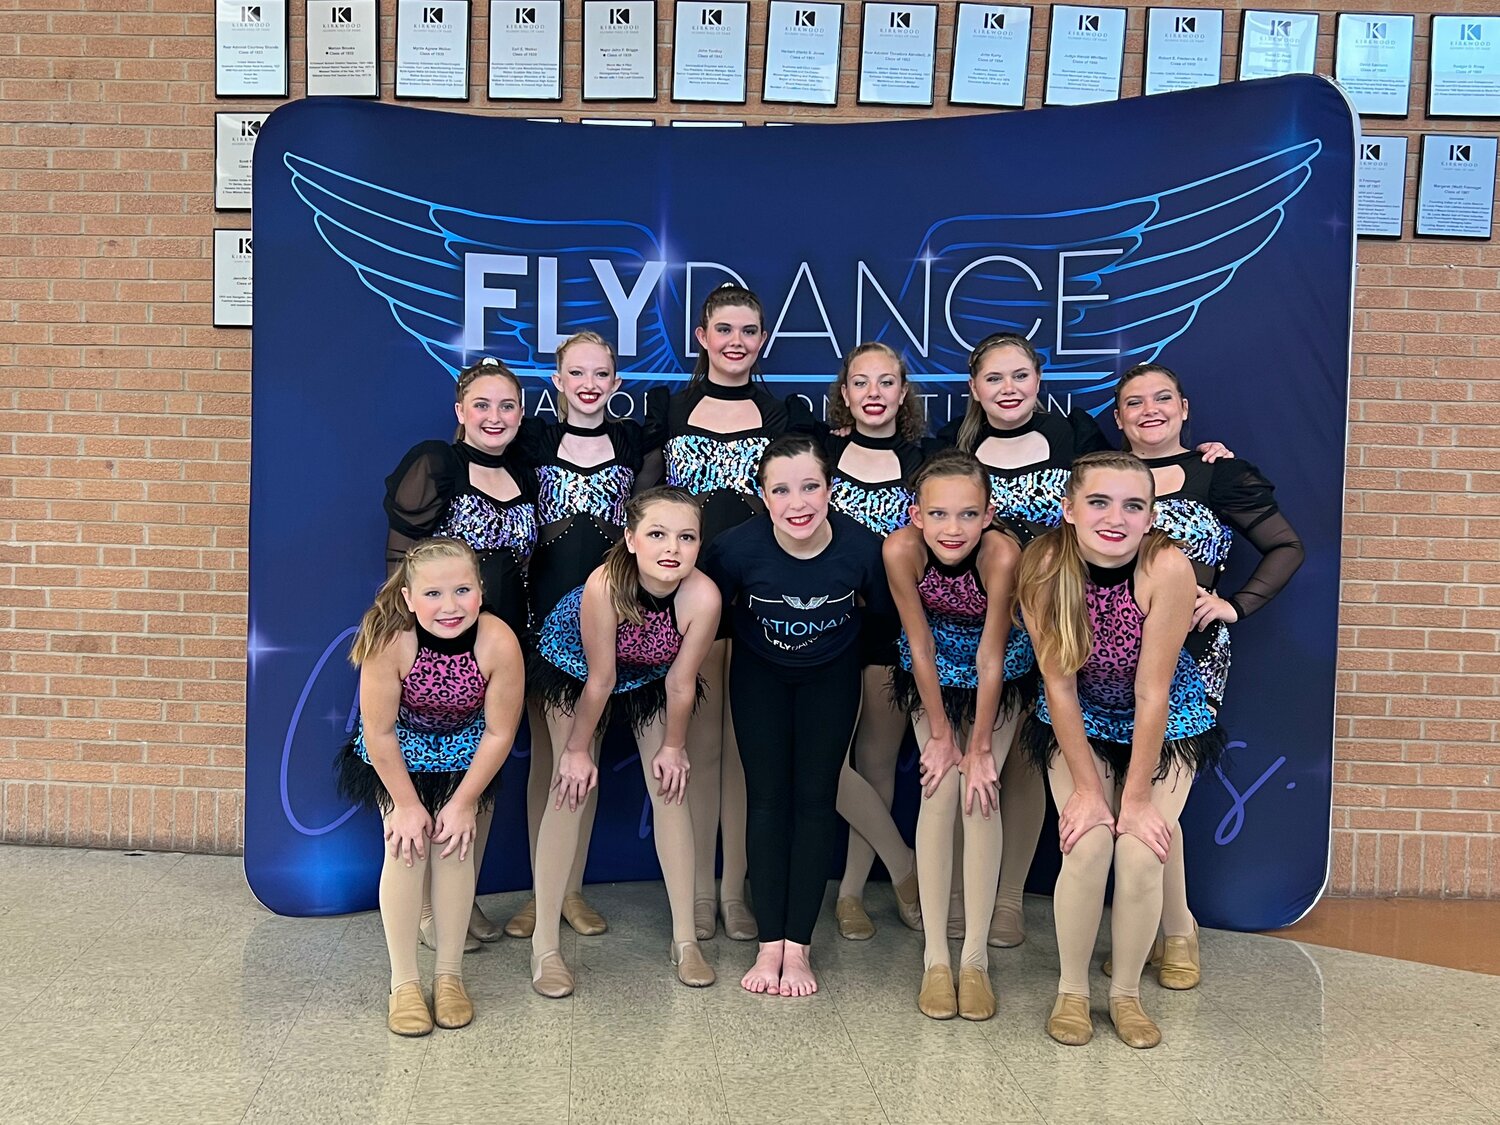 The 11 members of the BTC F.O.R.C.E. competition team pose for a photo at at the Fly Dance Competition Nationals in St. Louis, Missouri.